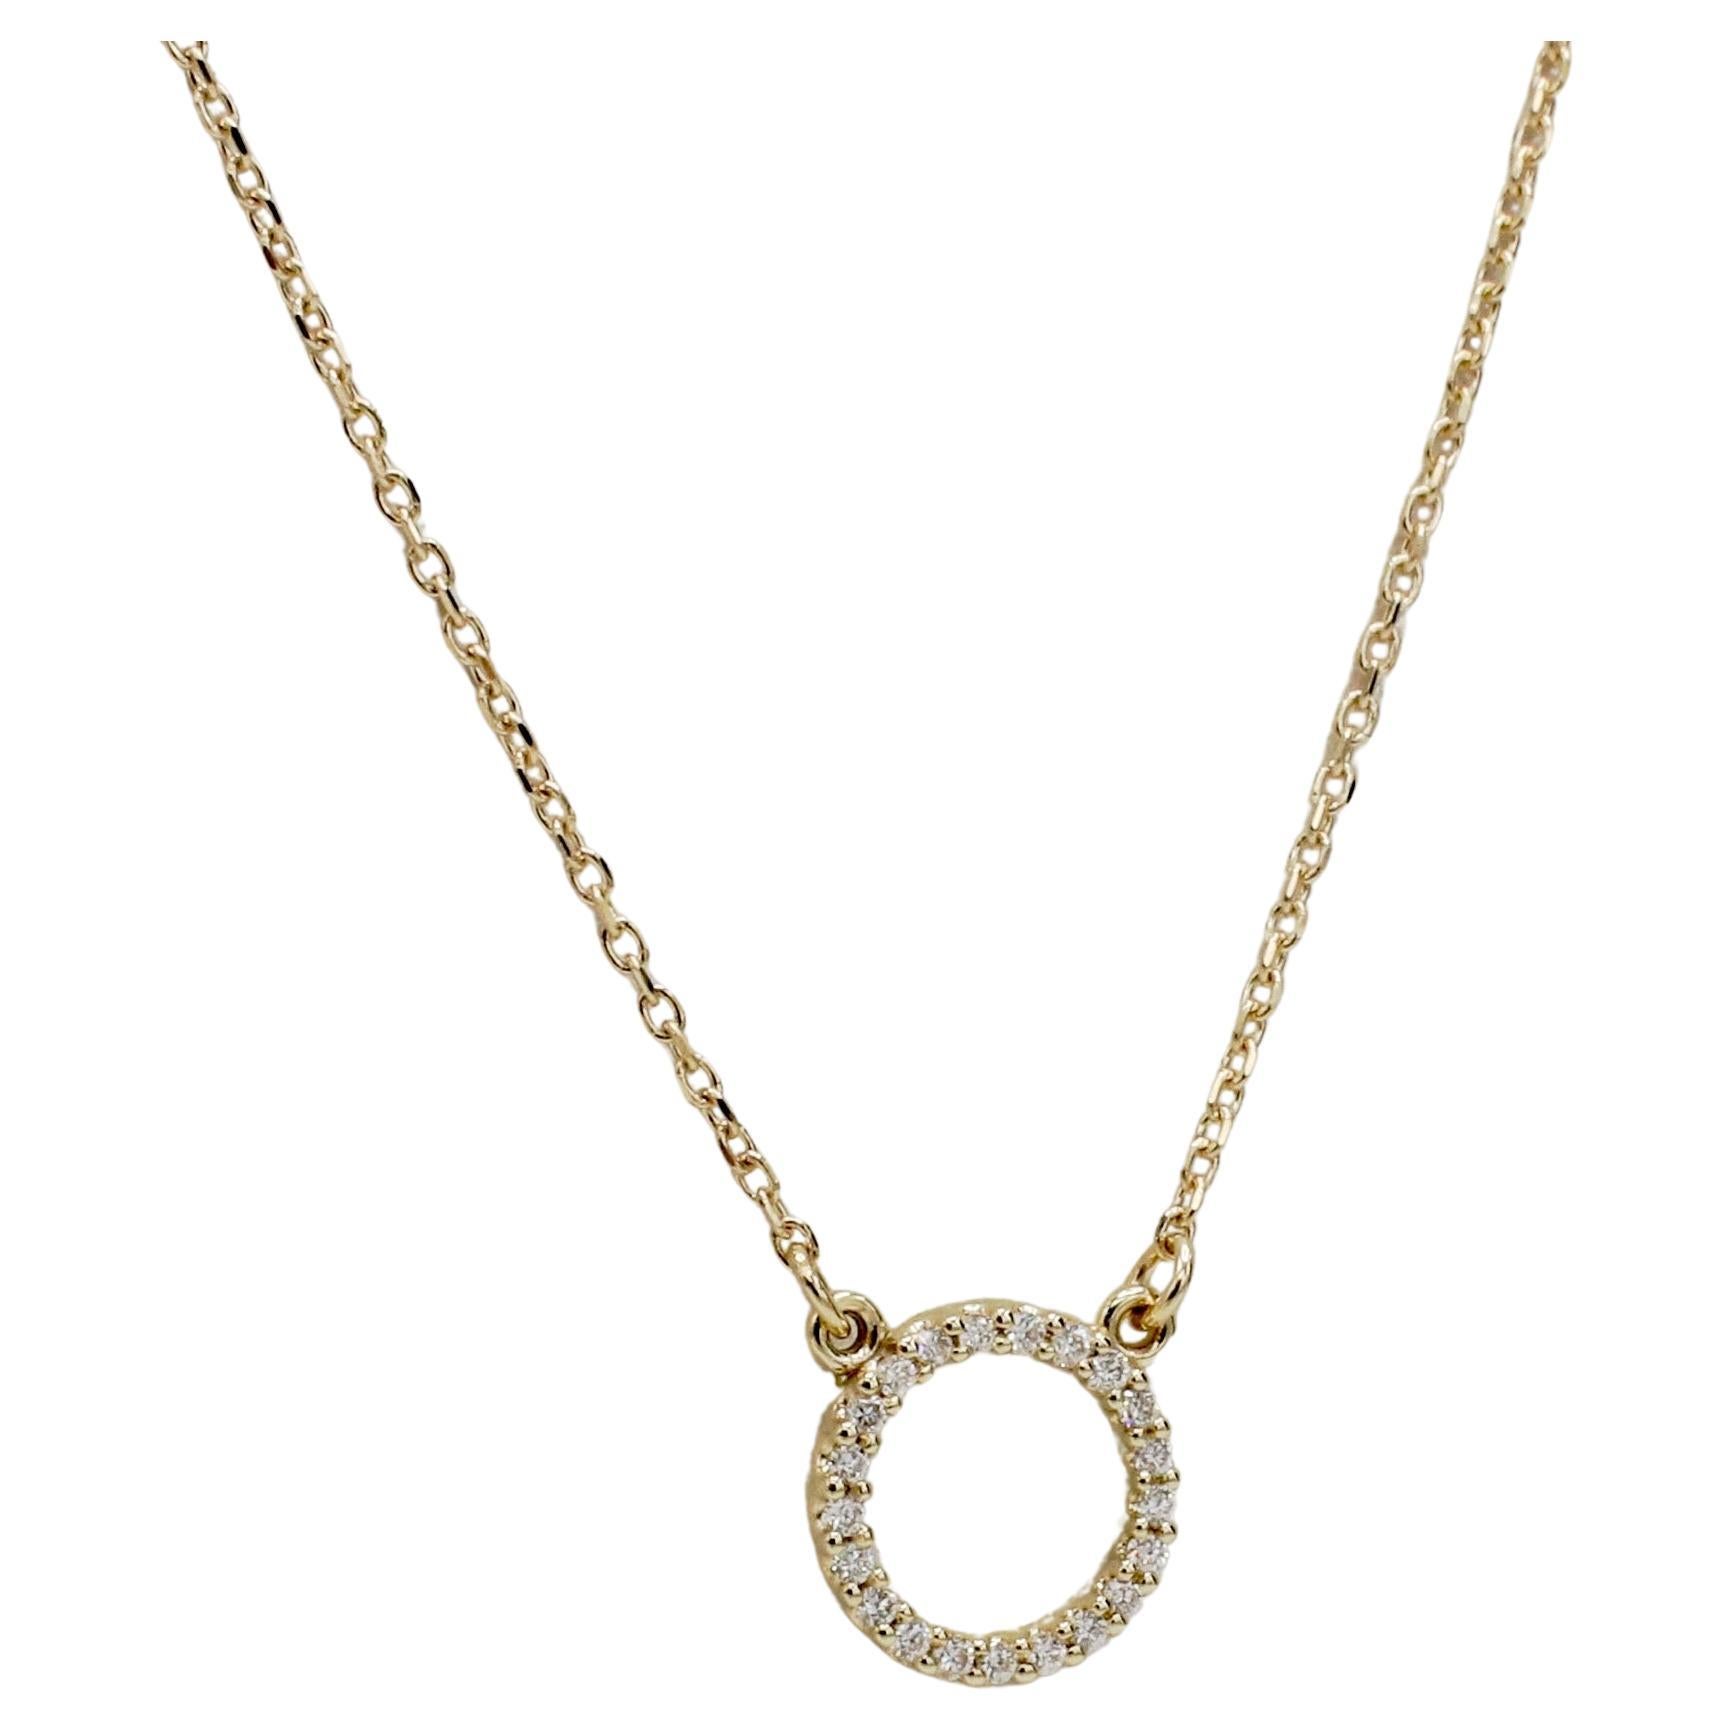 14 Karat Yellow Gold Natural Diamond Circle Pendant Necklace 
Metal: 14k yellow gold
Weight: 1.47 grams
Diamonds: .08 CTW natural round diamonds G-H SI
Length: 16 inches
Circle: 9mm
Note: Also available in white and rose gold